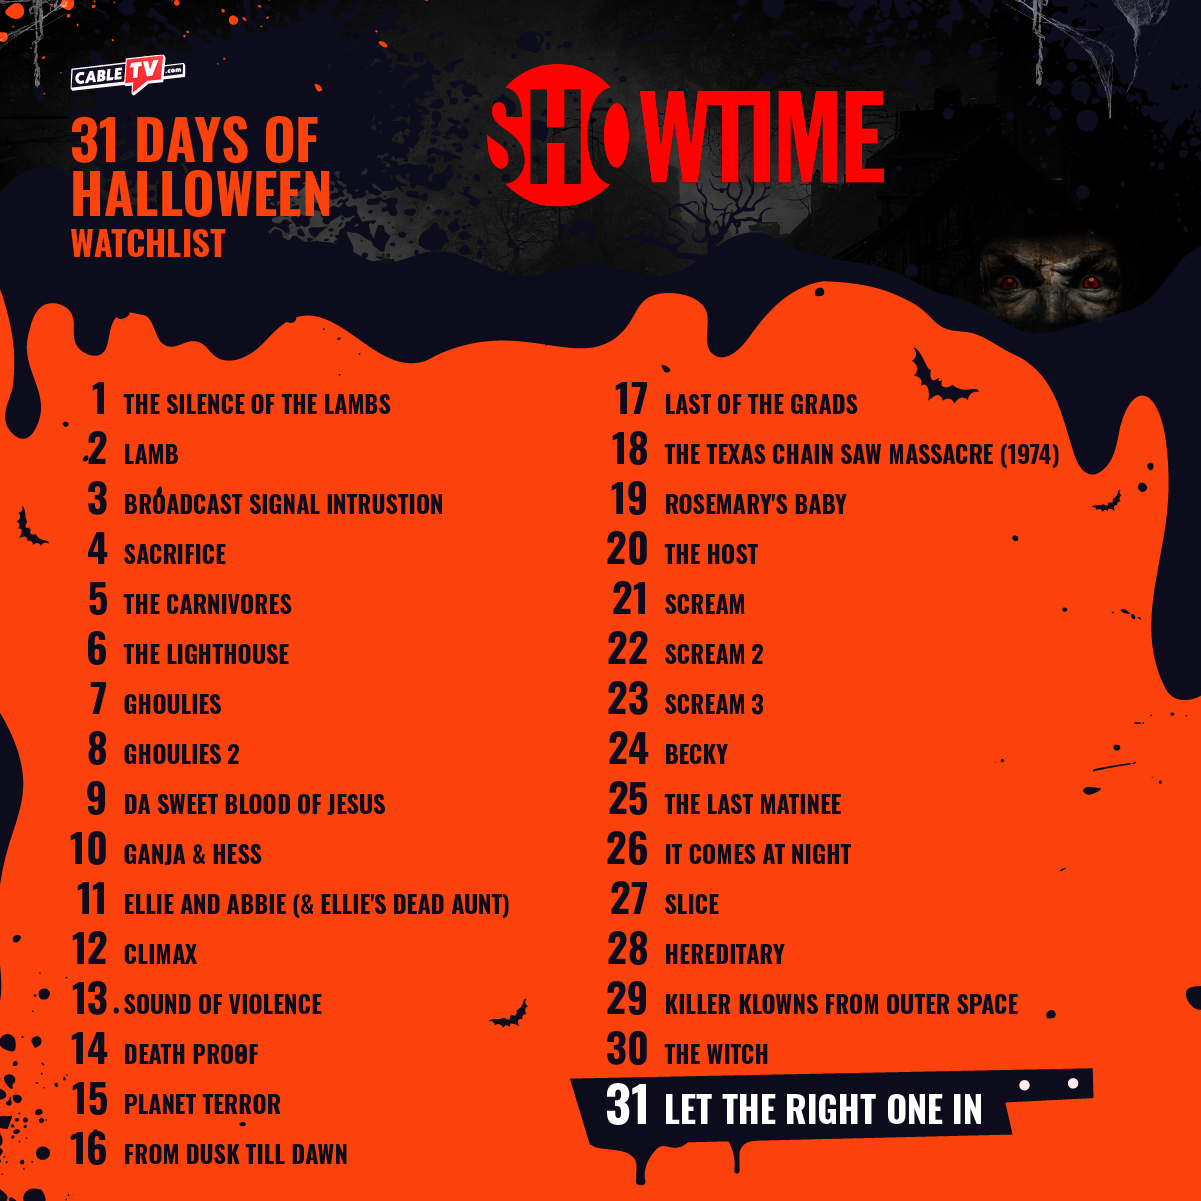 List of 31 horror movies to watch in October on SHOWTIME